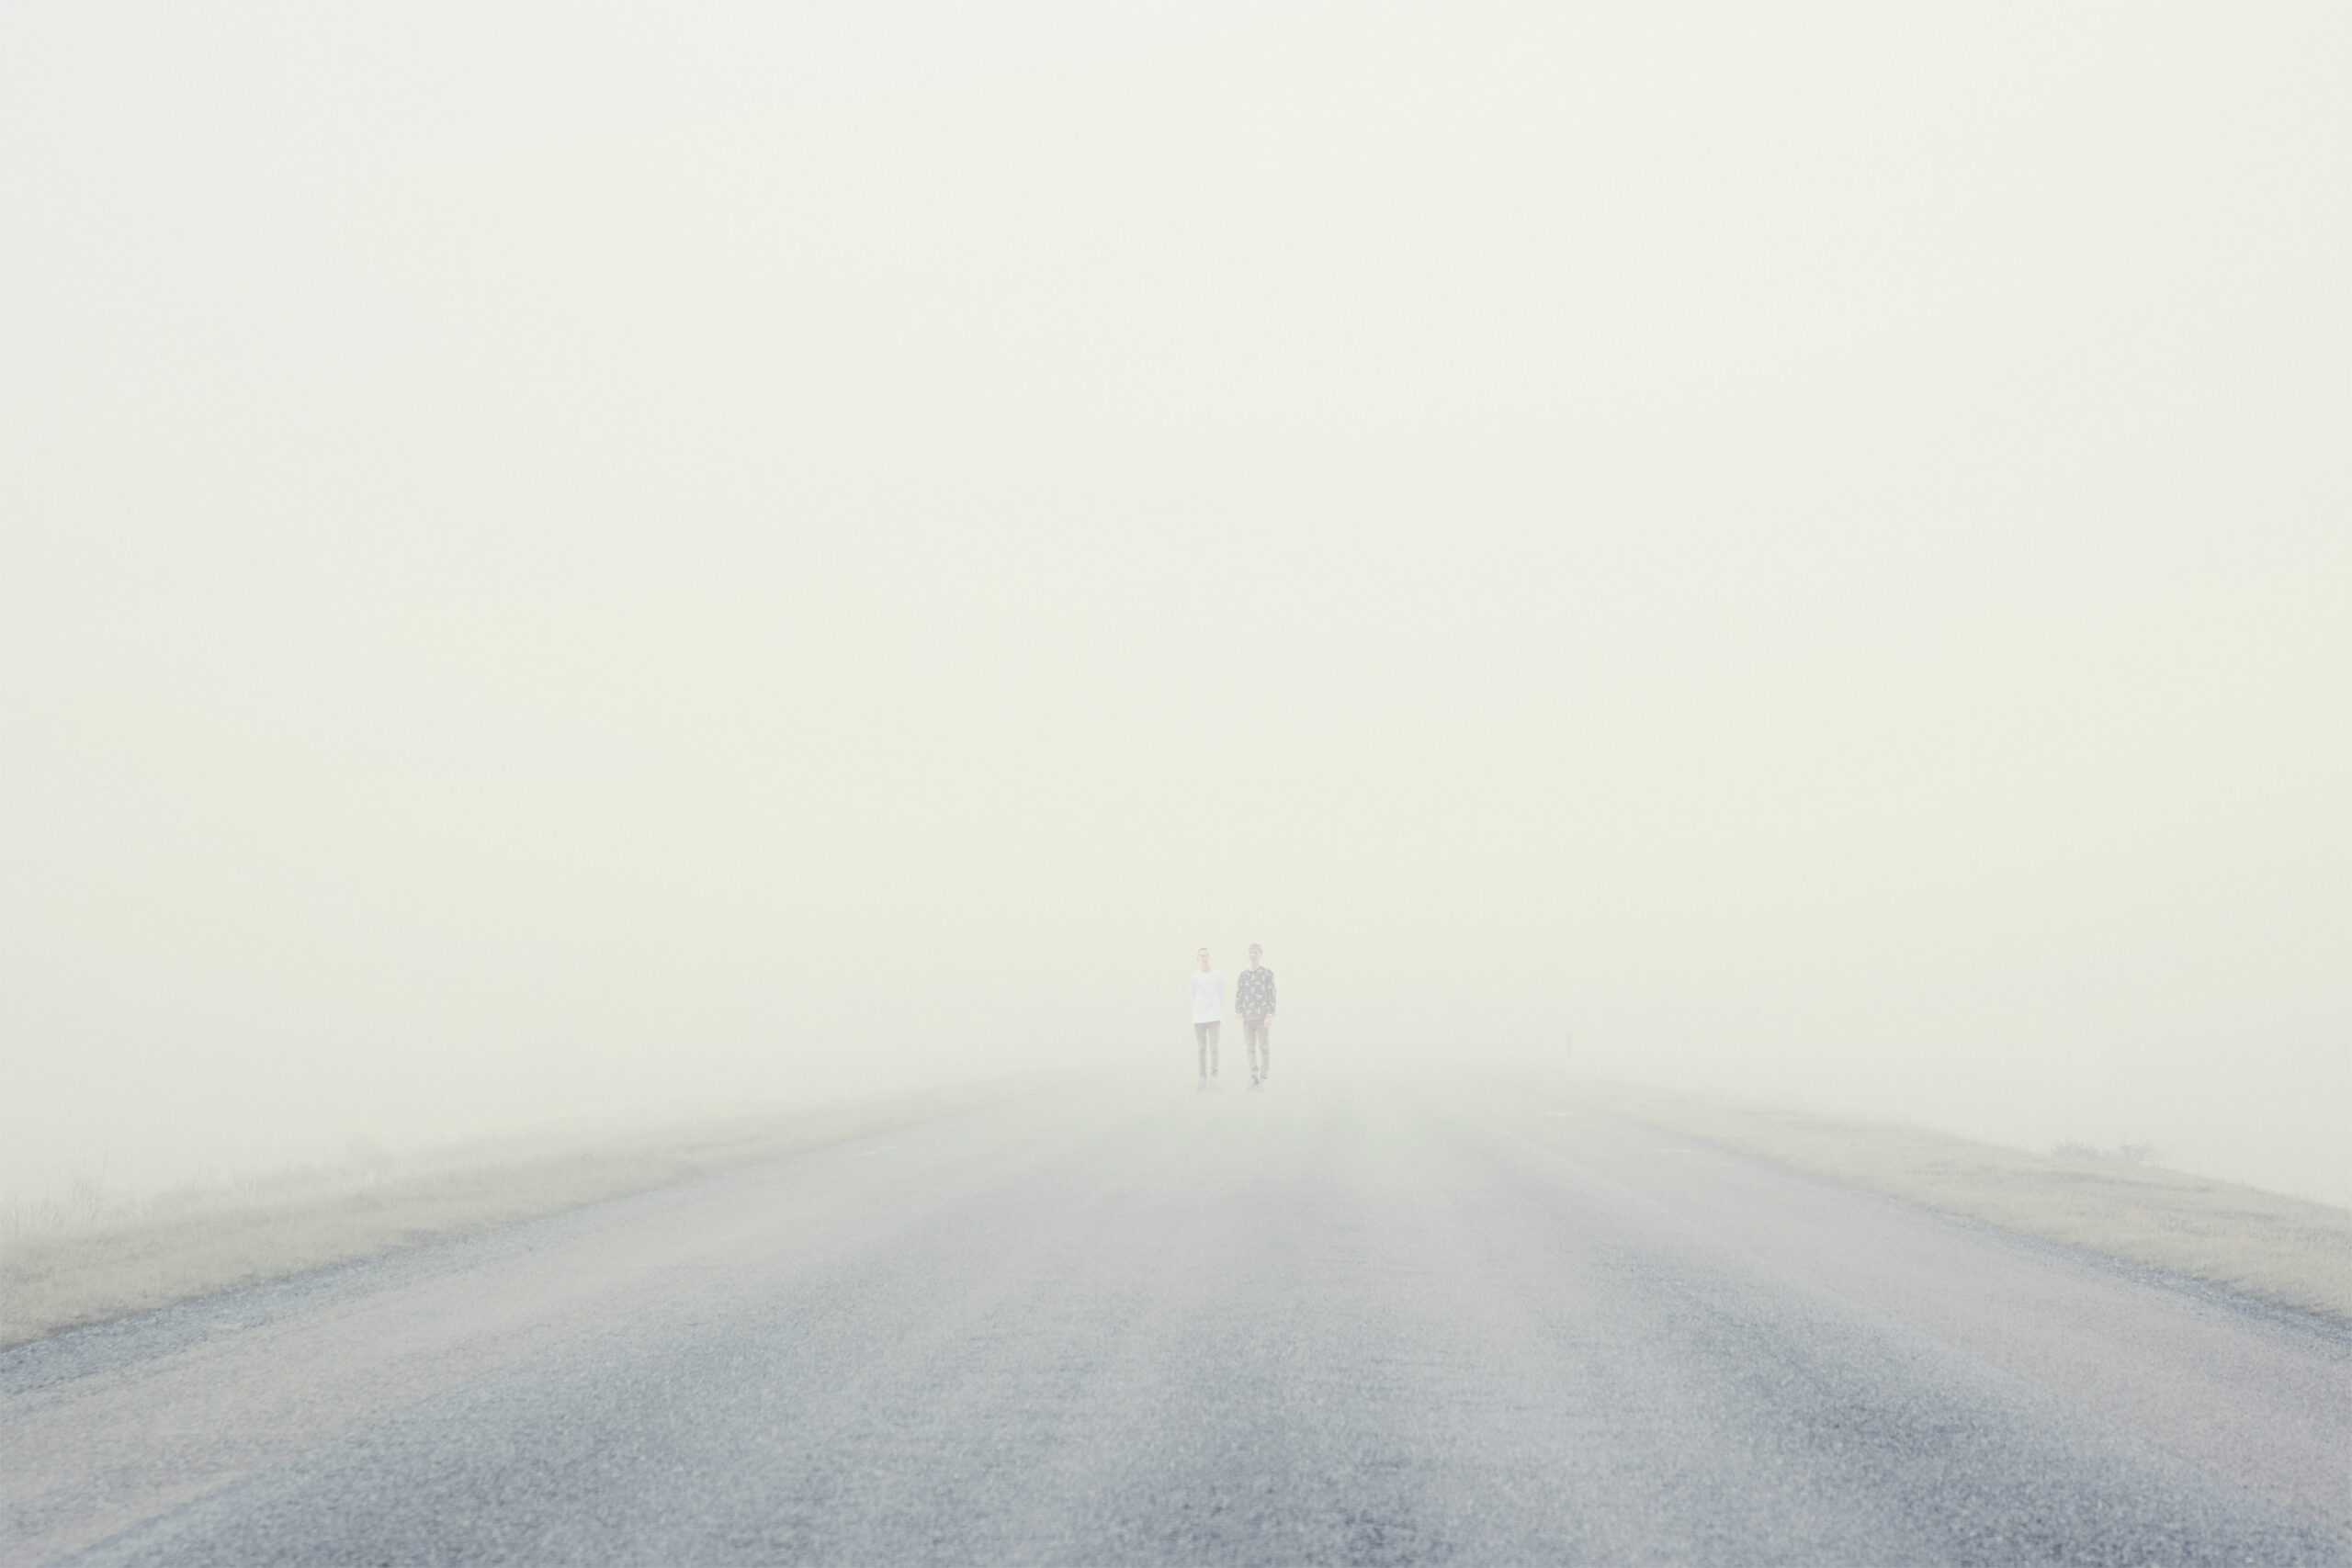 INTO THE MIST no. 06